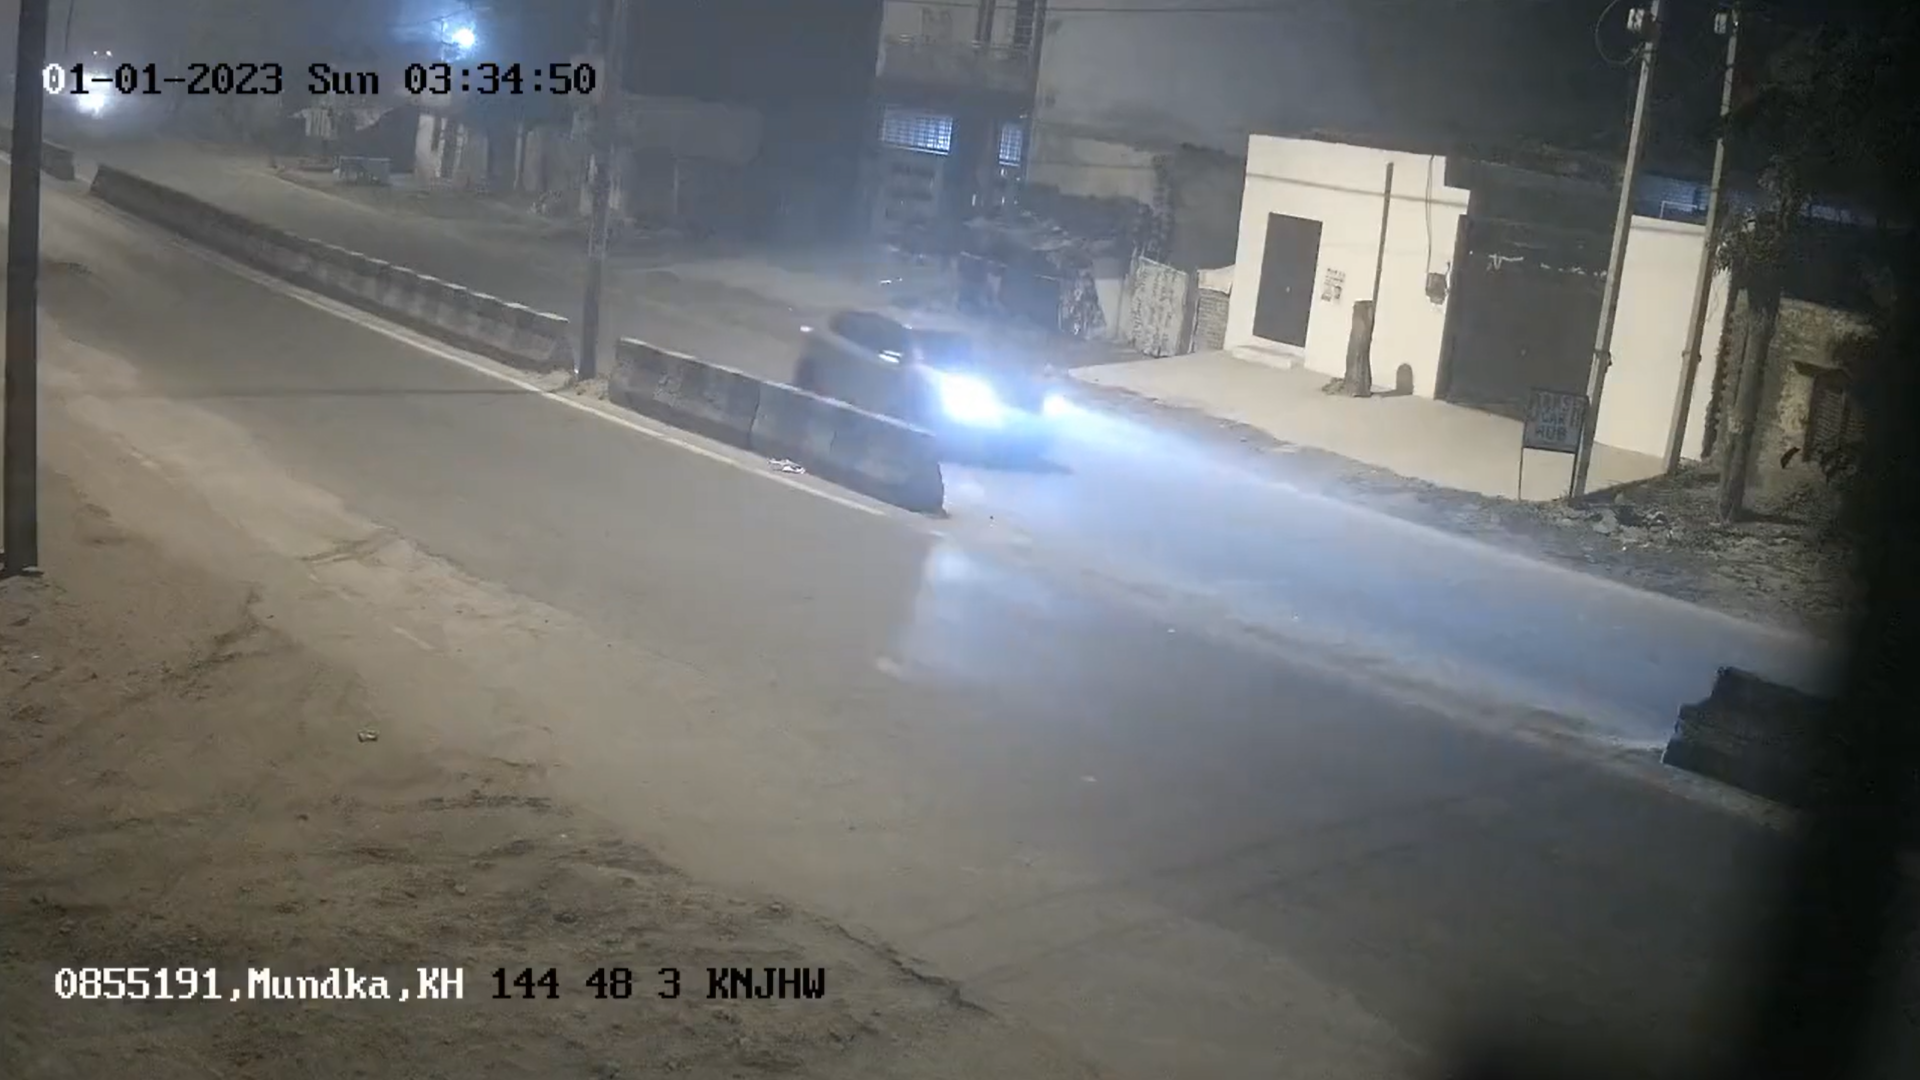 A still from CCTV footage shows the car purportedly dragging the body on Delhi roads